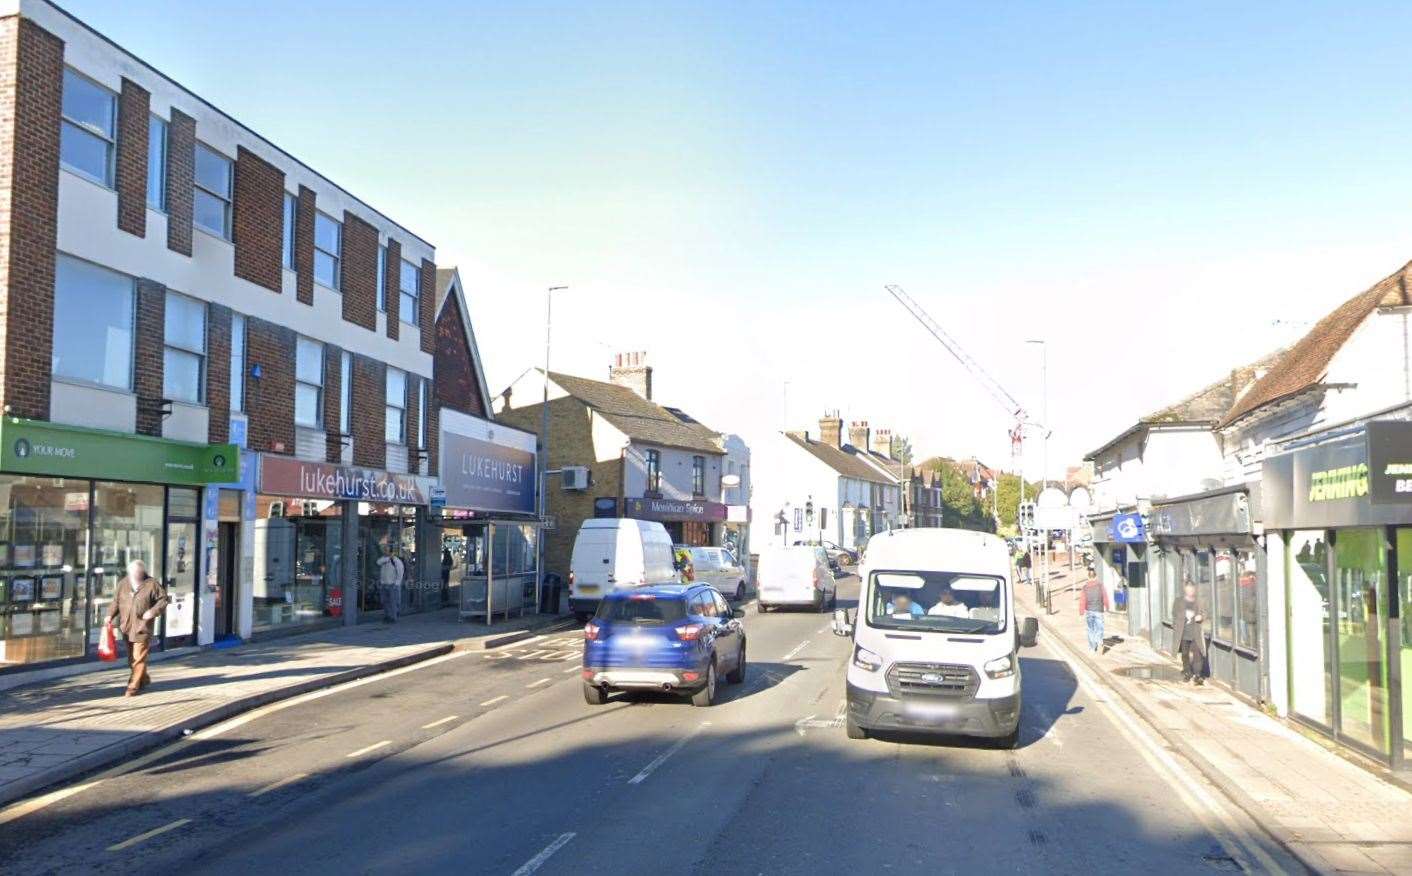 Officers were called to Rainham High Street after reports of a robbery. Picture: Google